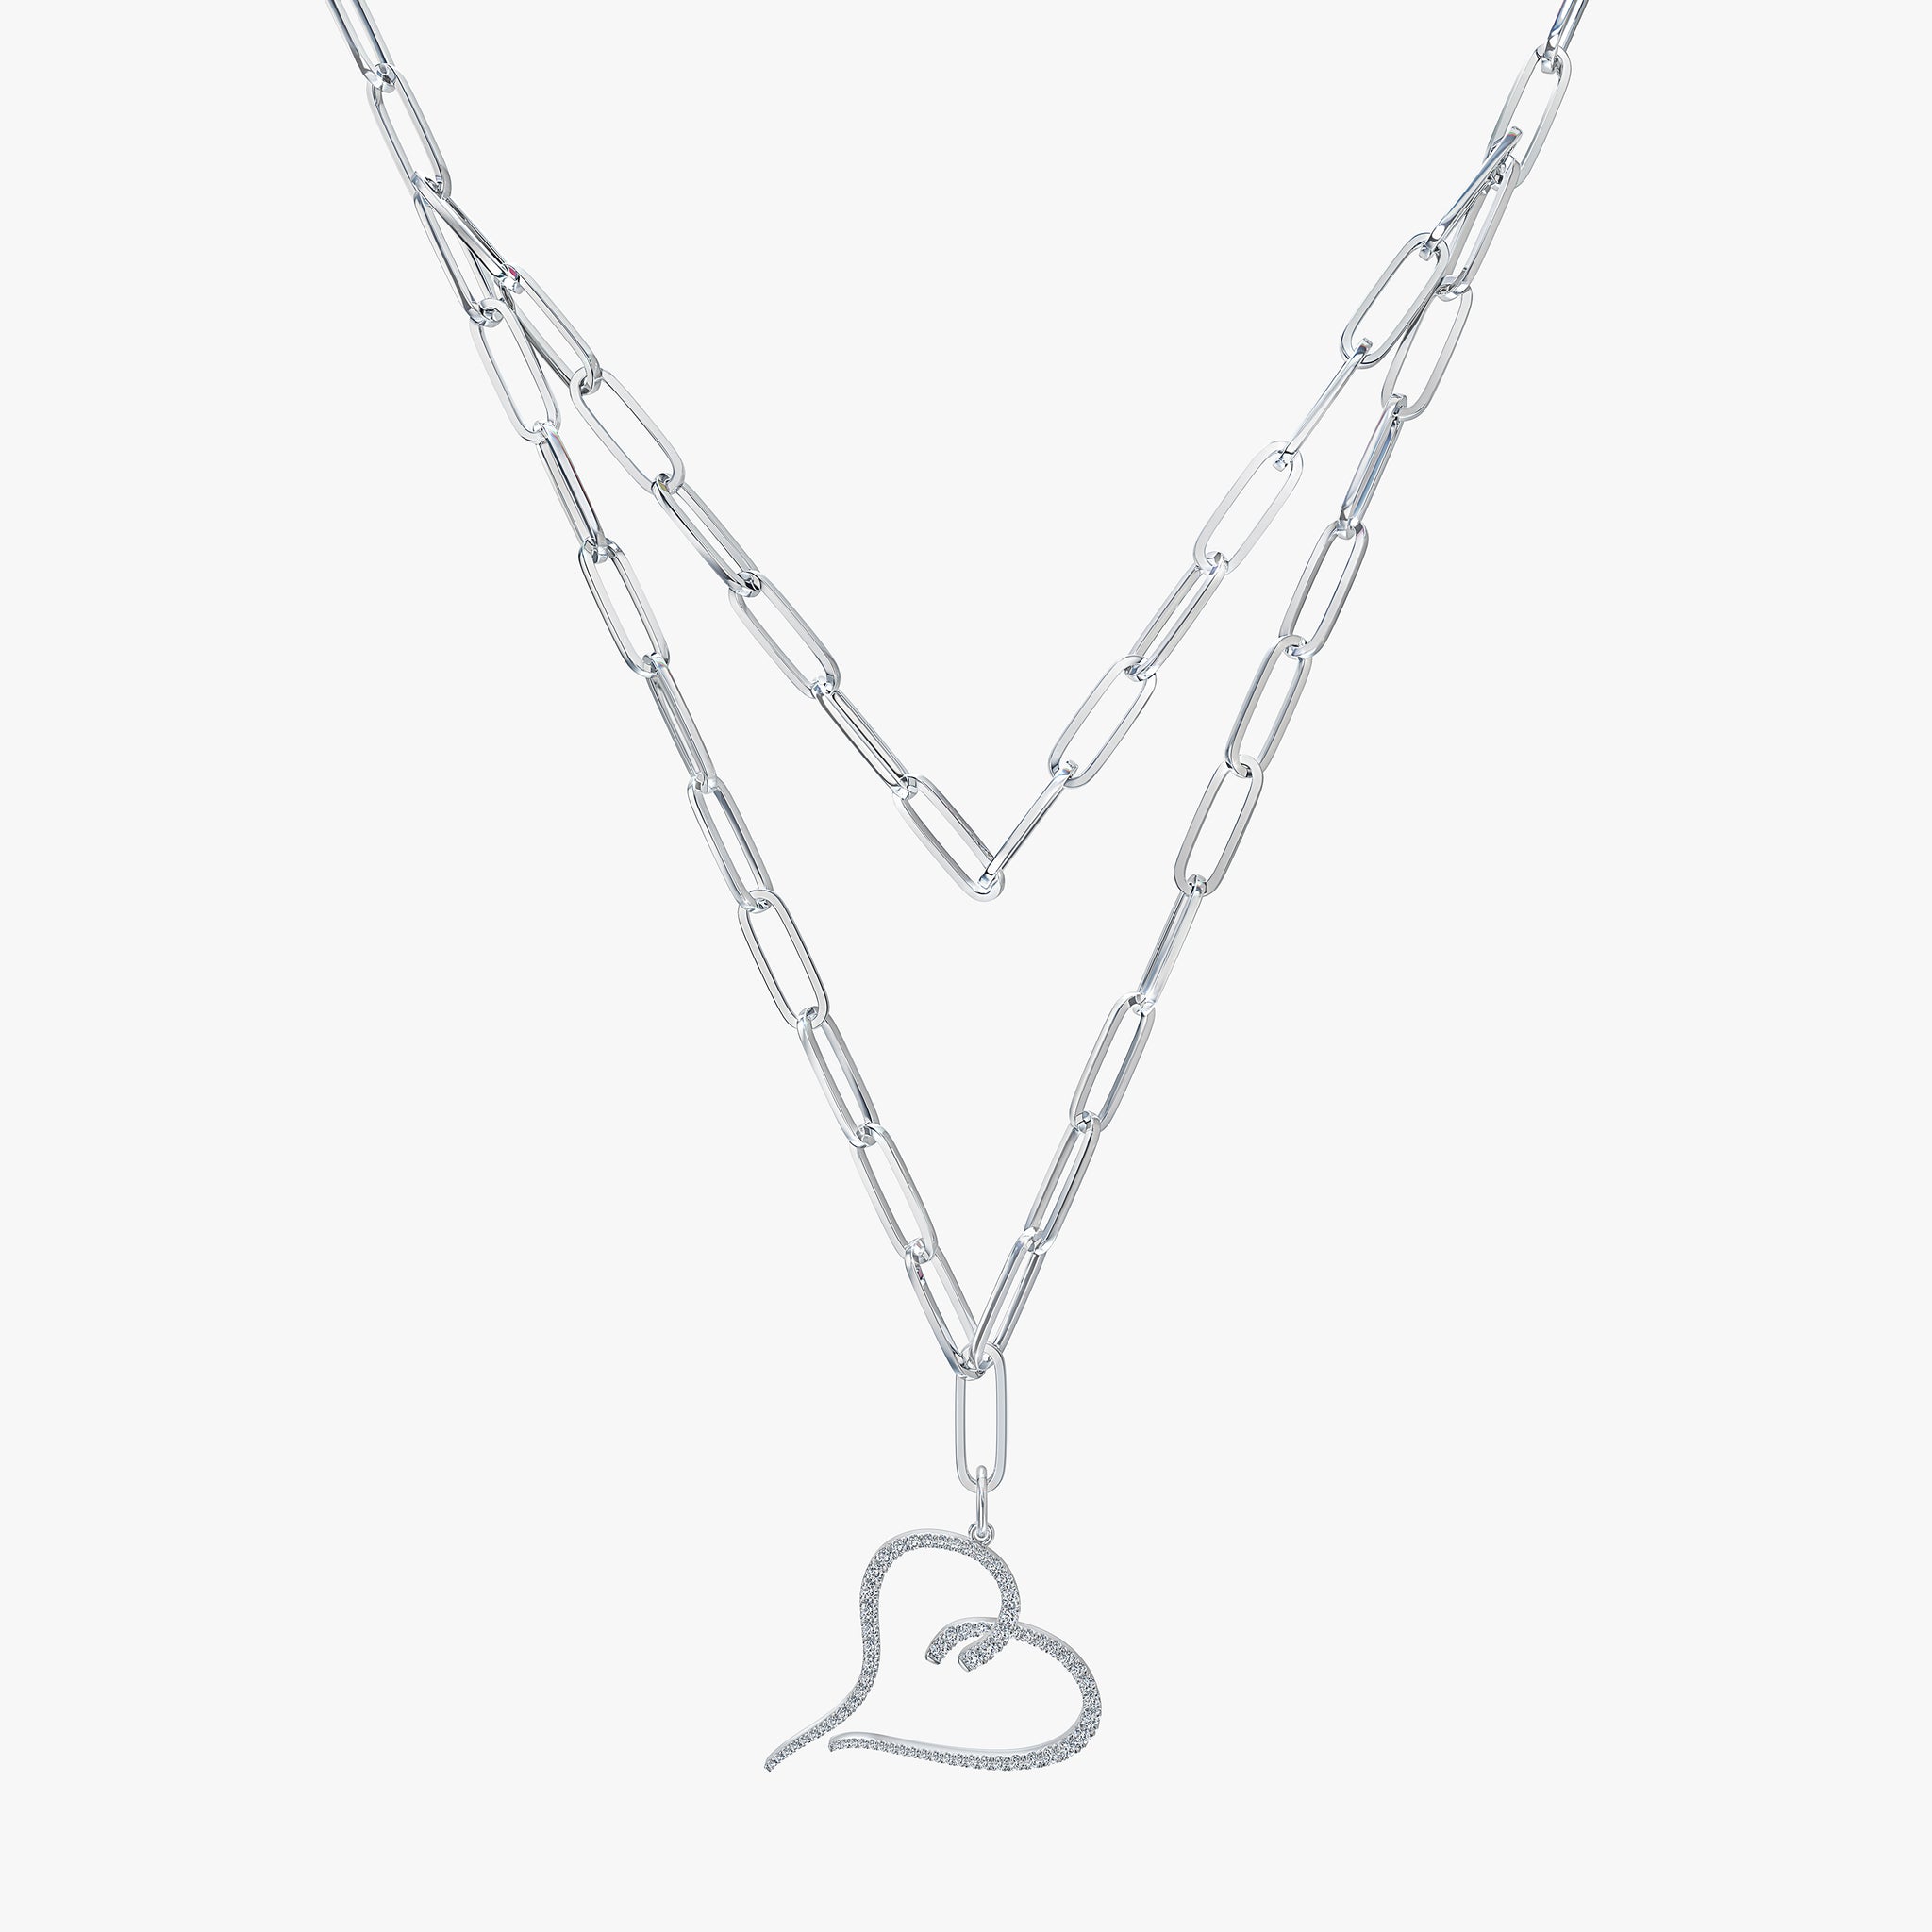 J'EVAR 14KT White Gold Two Row Paperclip Heart ALTR Lab Grown Diamond Necklace Lock View